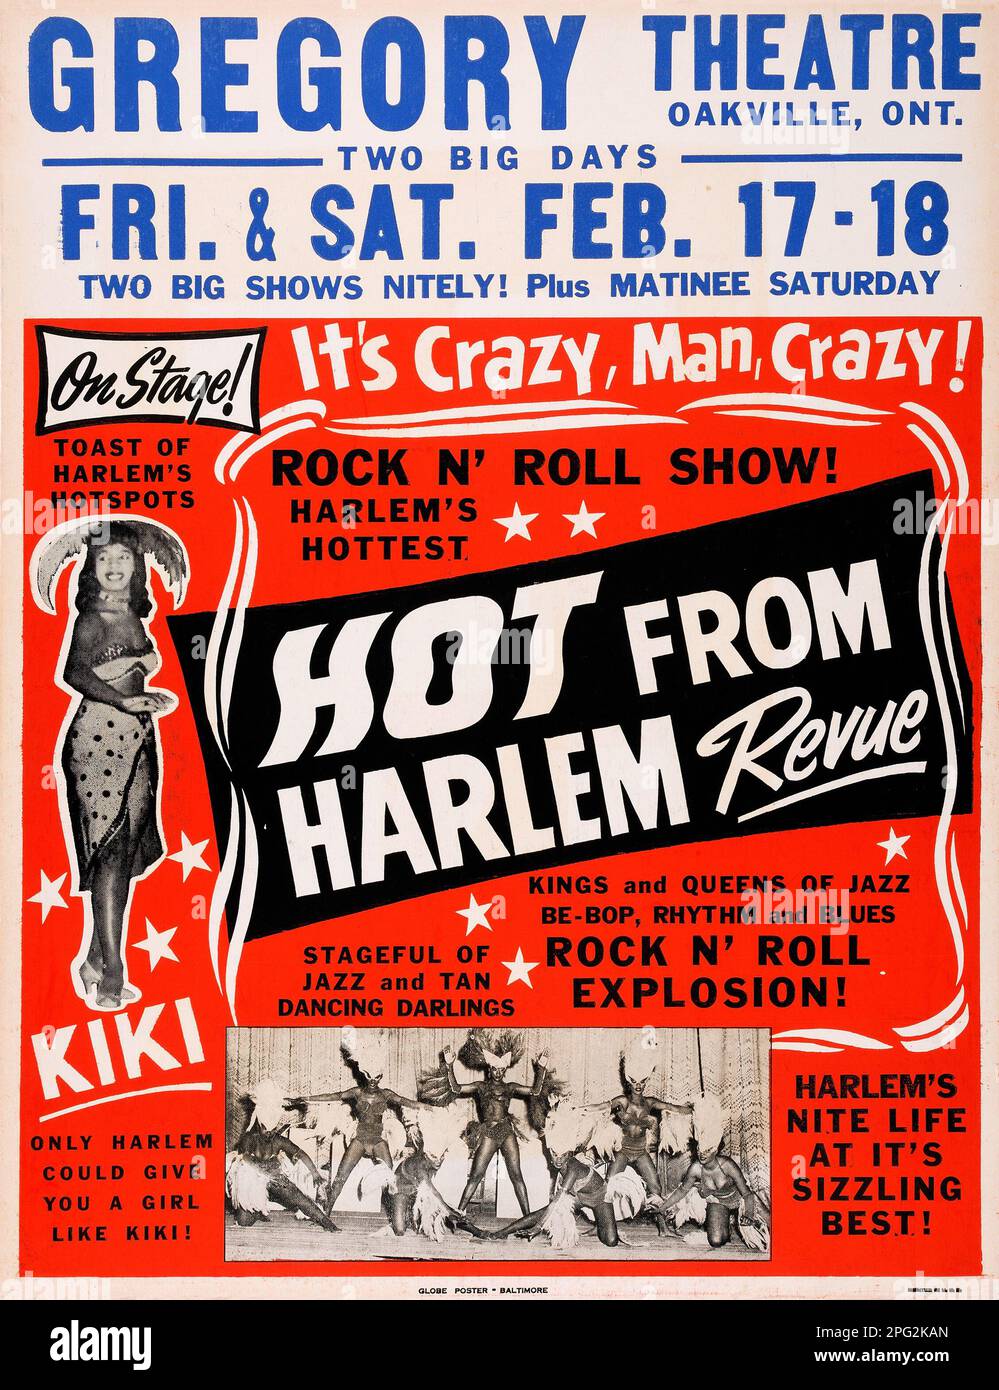 Hot from Harlem Revue - Rock and Roll Show - Gregory Theatre Concert Poster, Oakville, Ontario (1956) Foto Stock